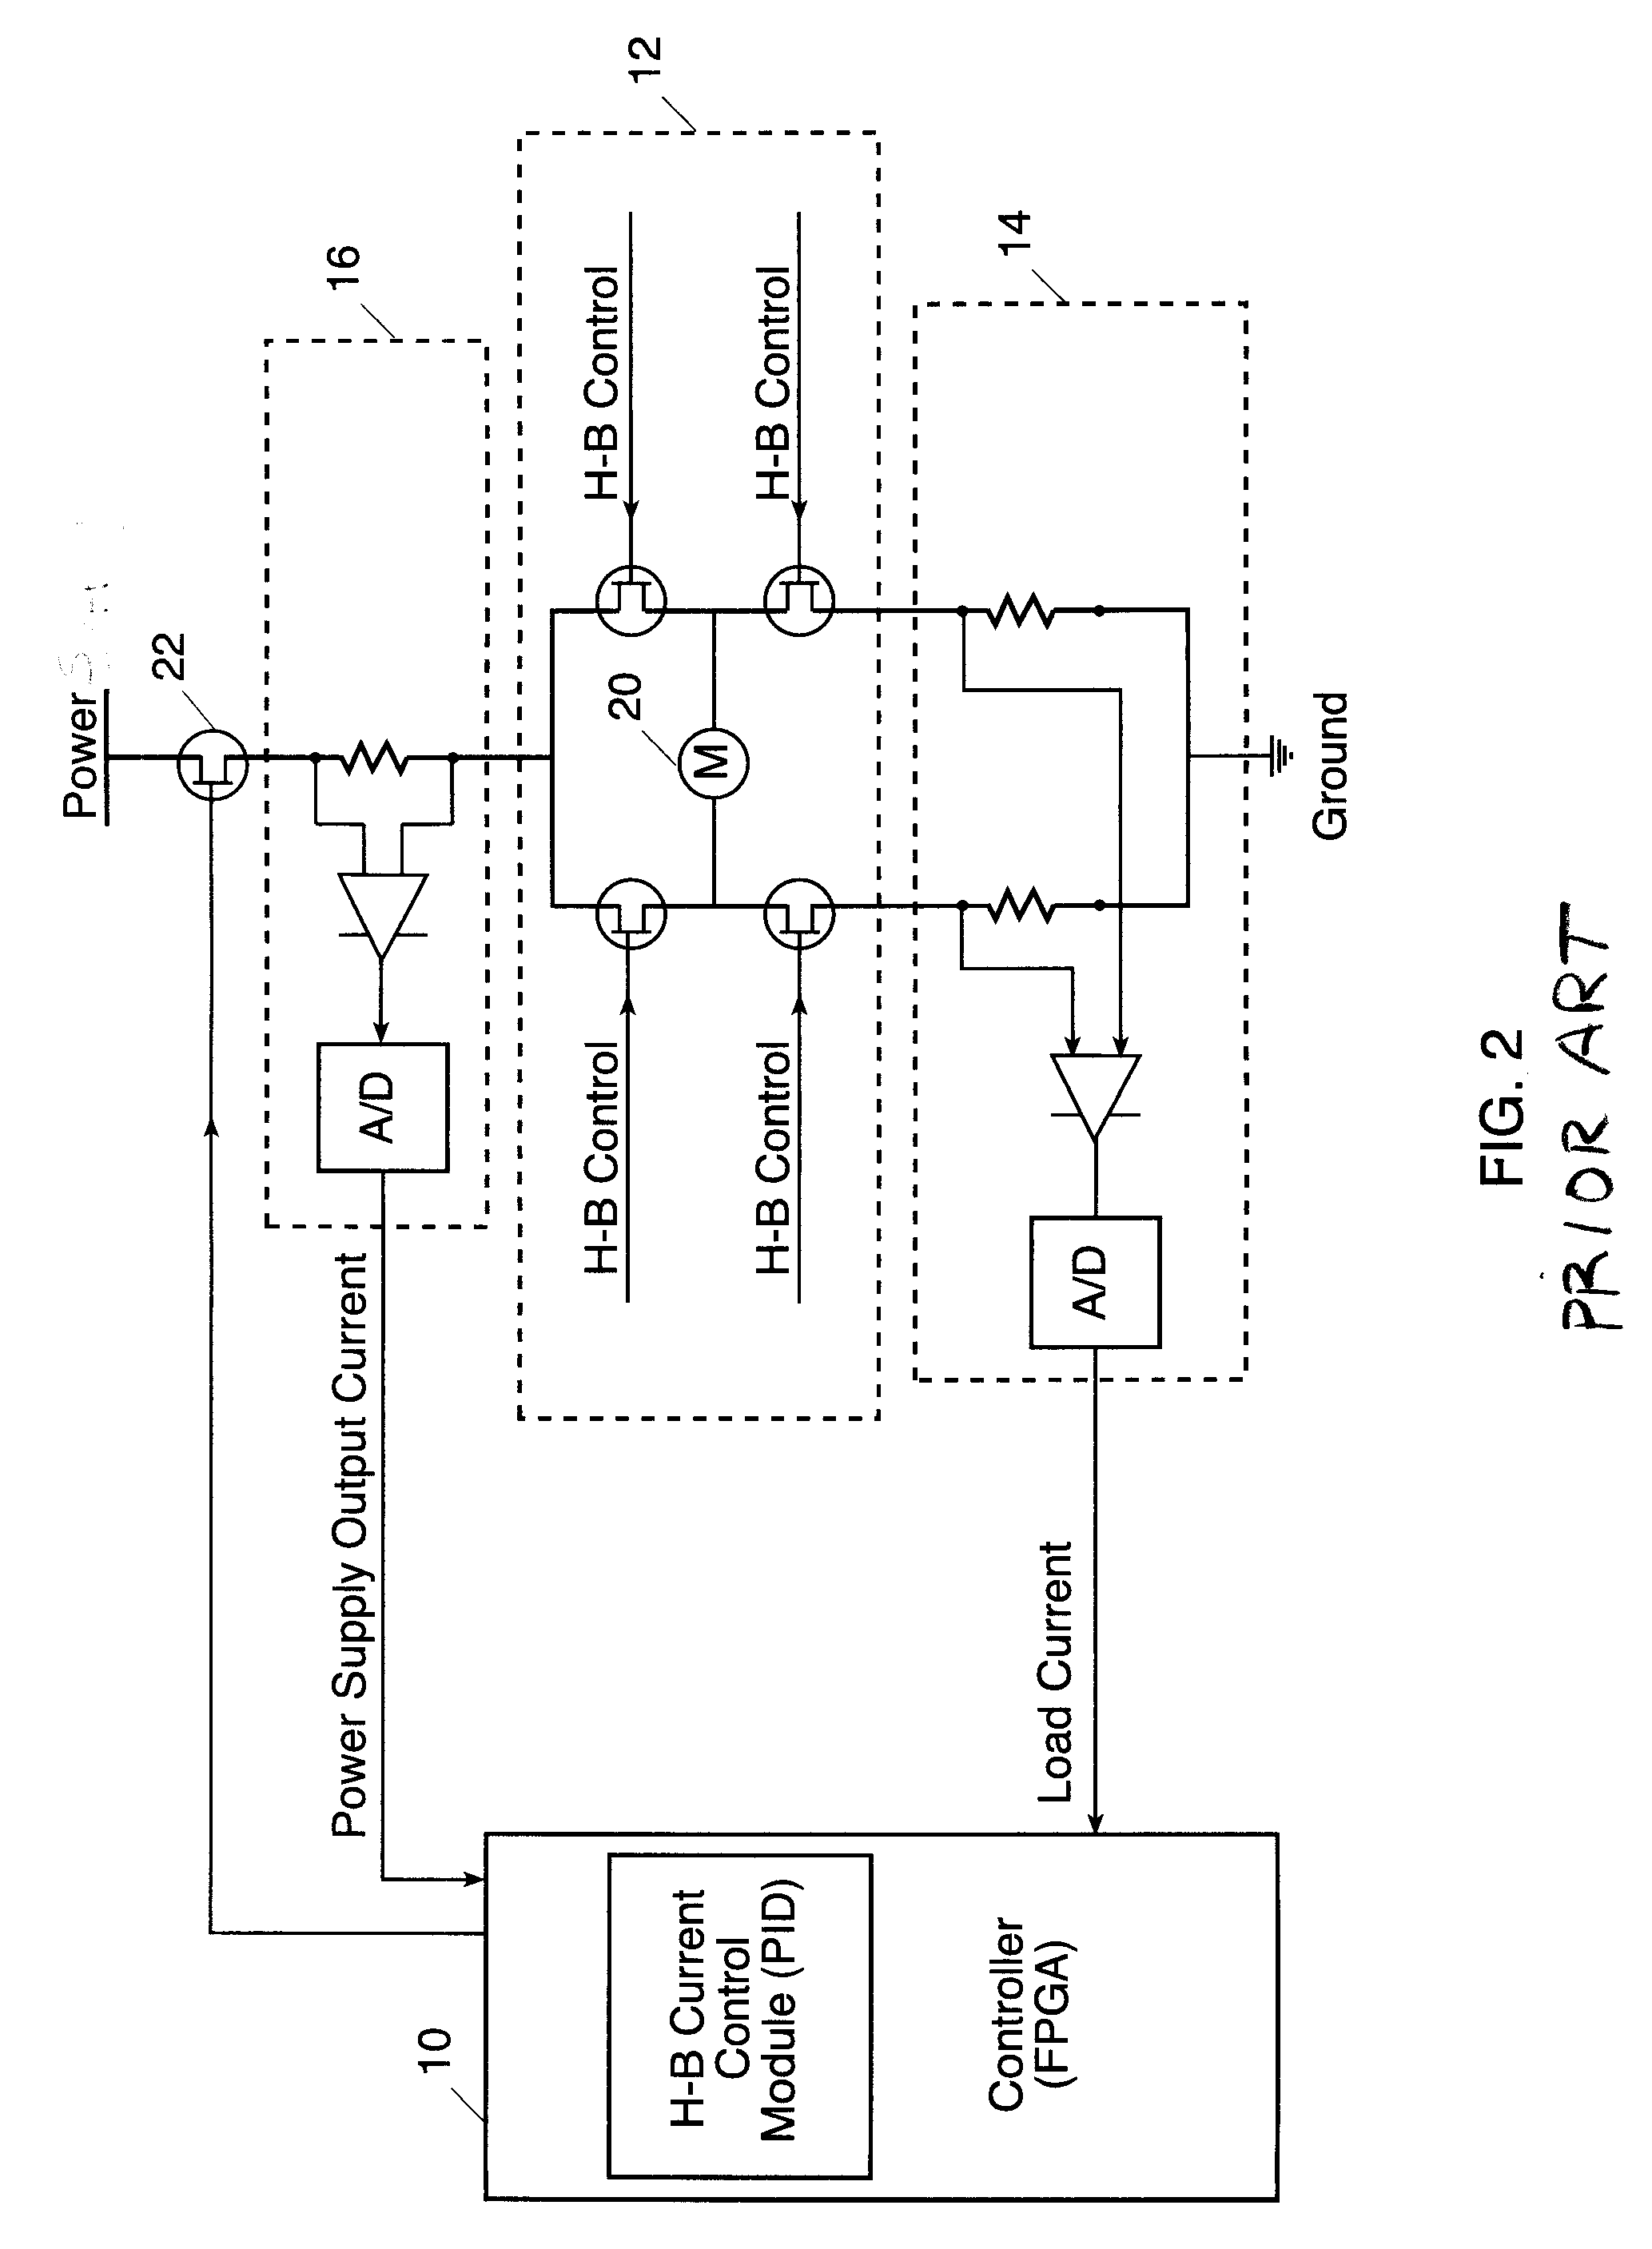 Apparatus and method for current control in h-bridge load drivers